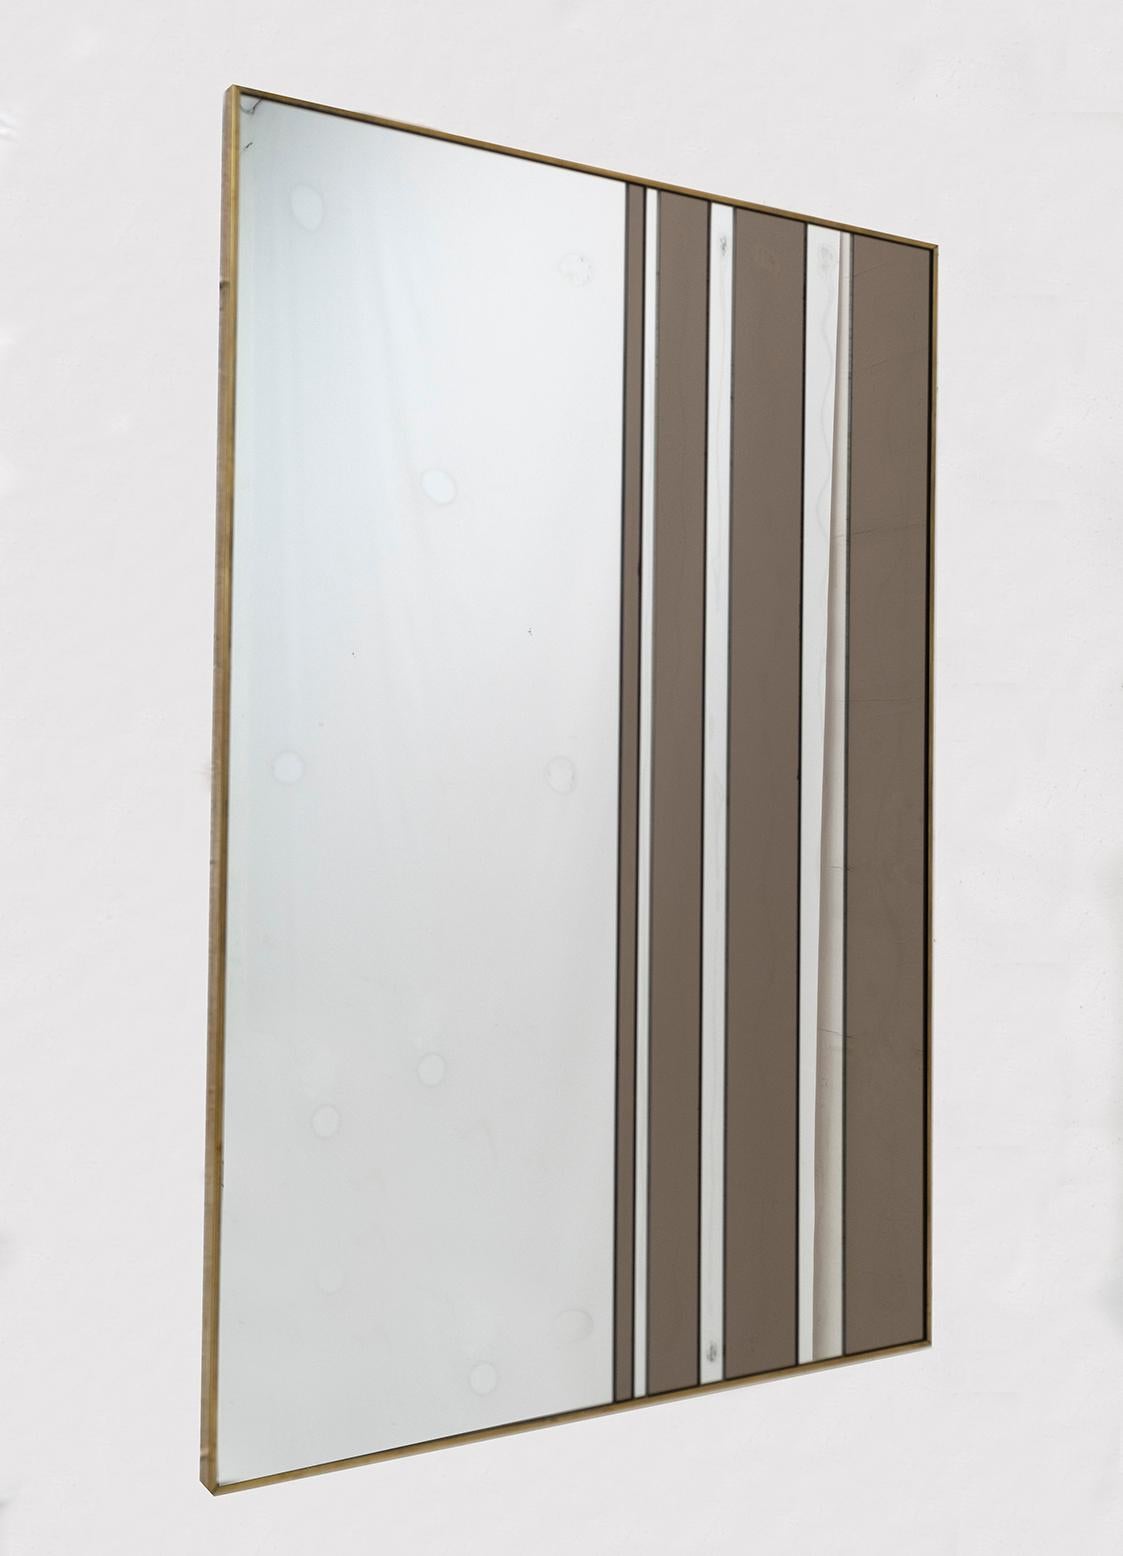 Large Mid-Century Modern Two-Tone Wall Mirror with Brass Frame, Attributed to Romeo Rega, 1970s.